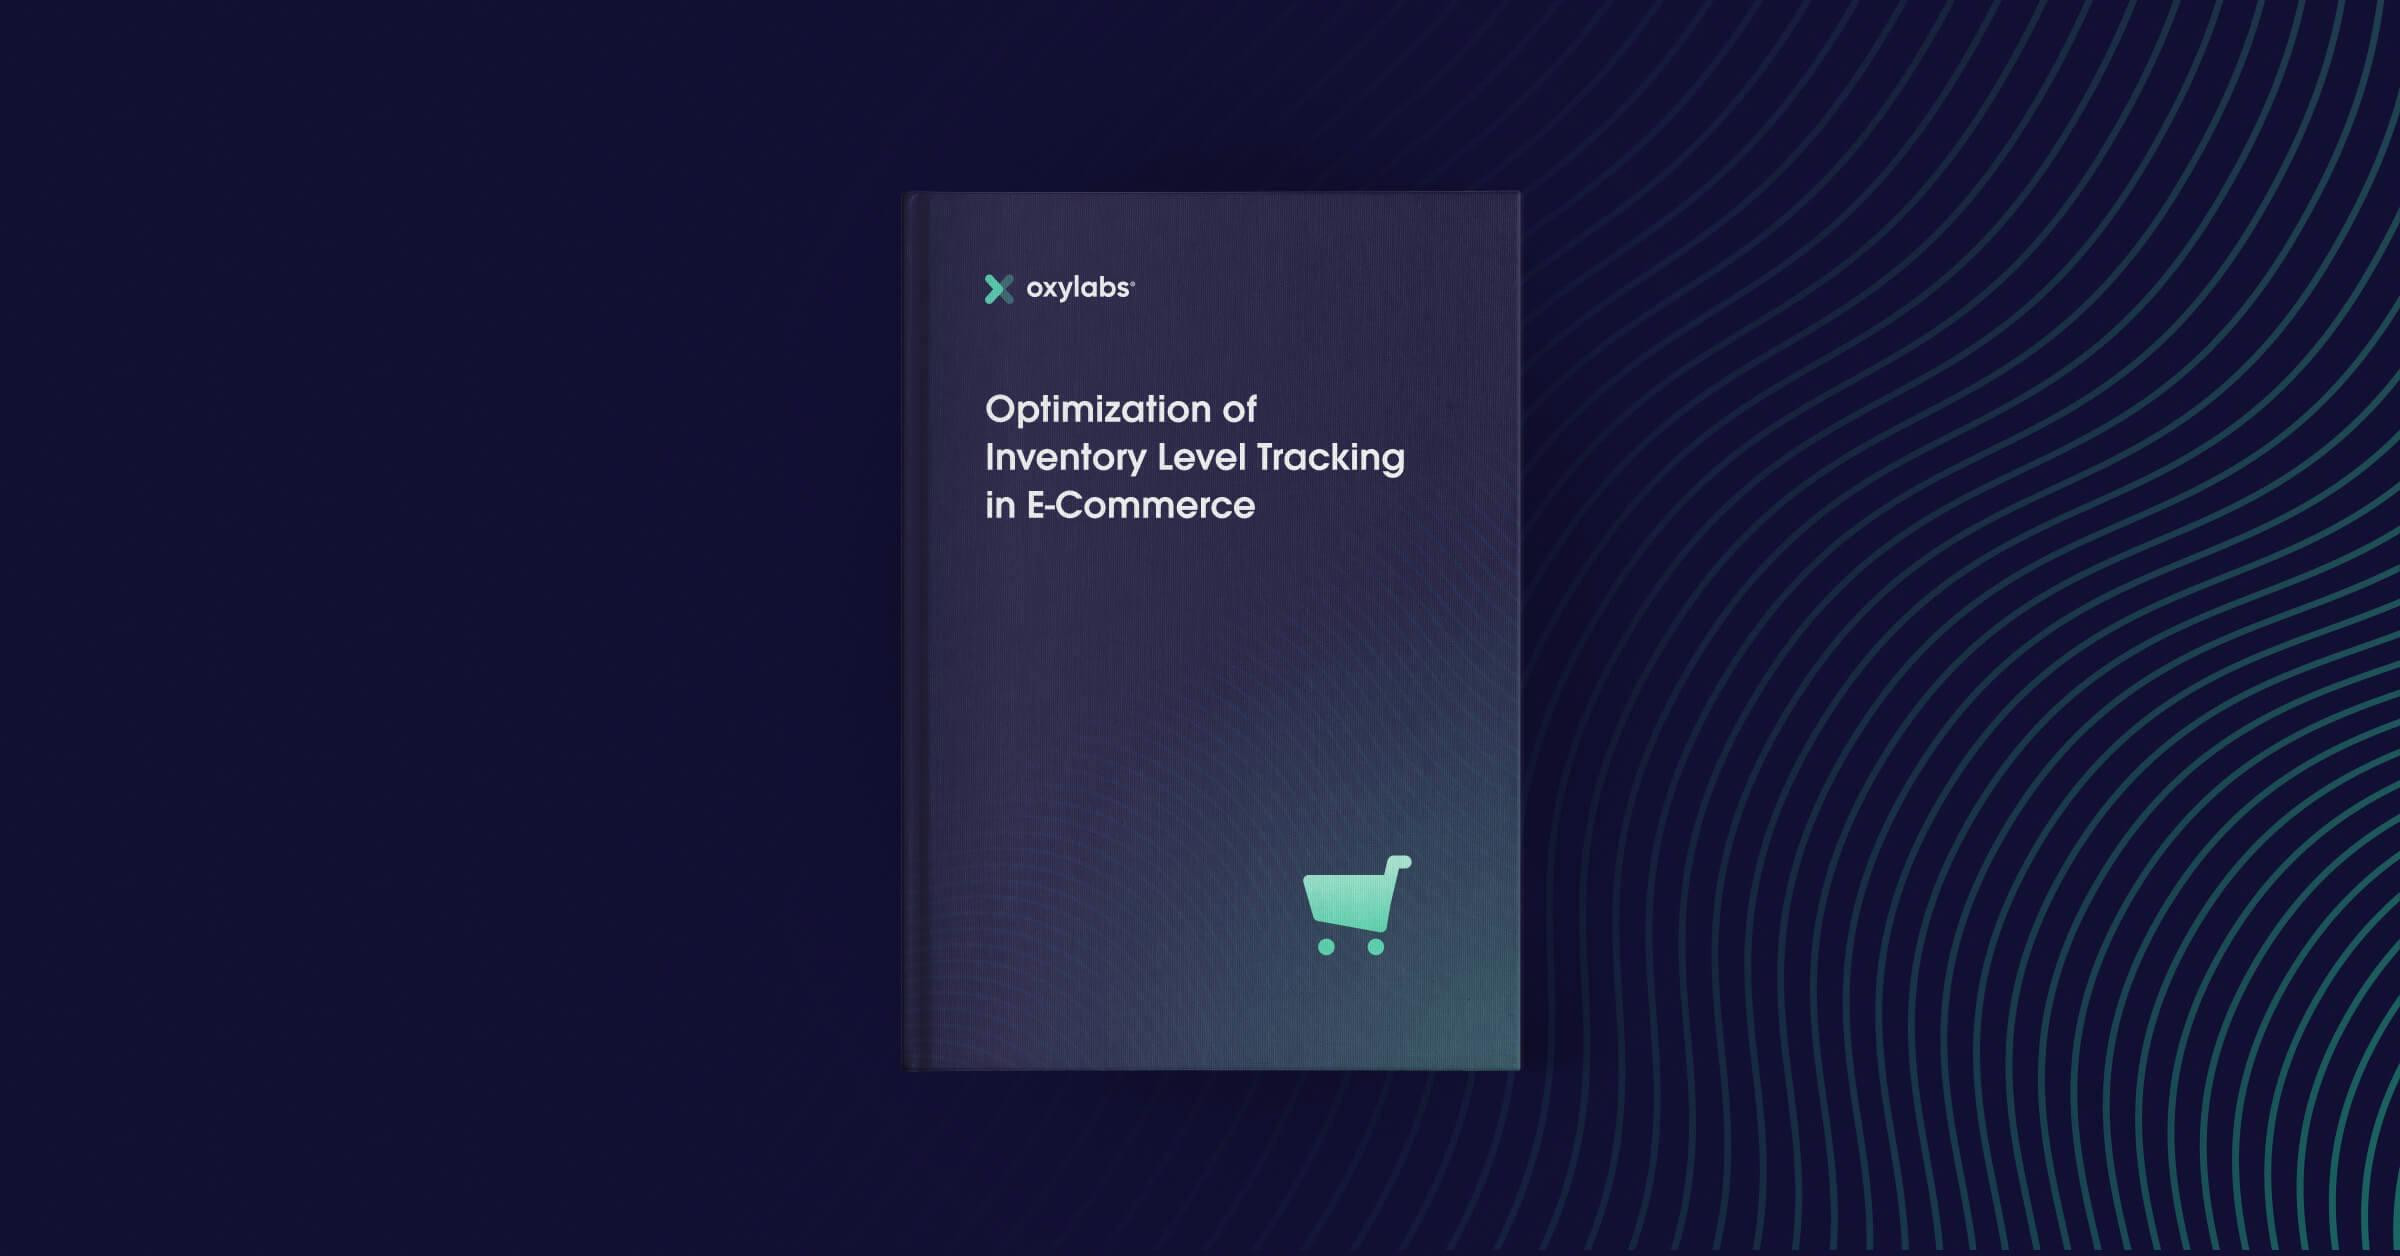 Optimization of Inventory Level Tracking in E-Commerce